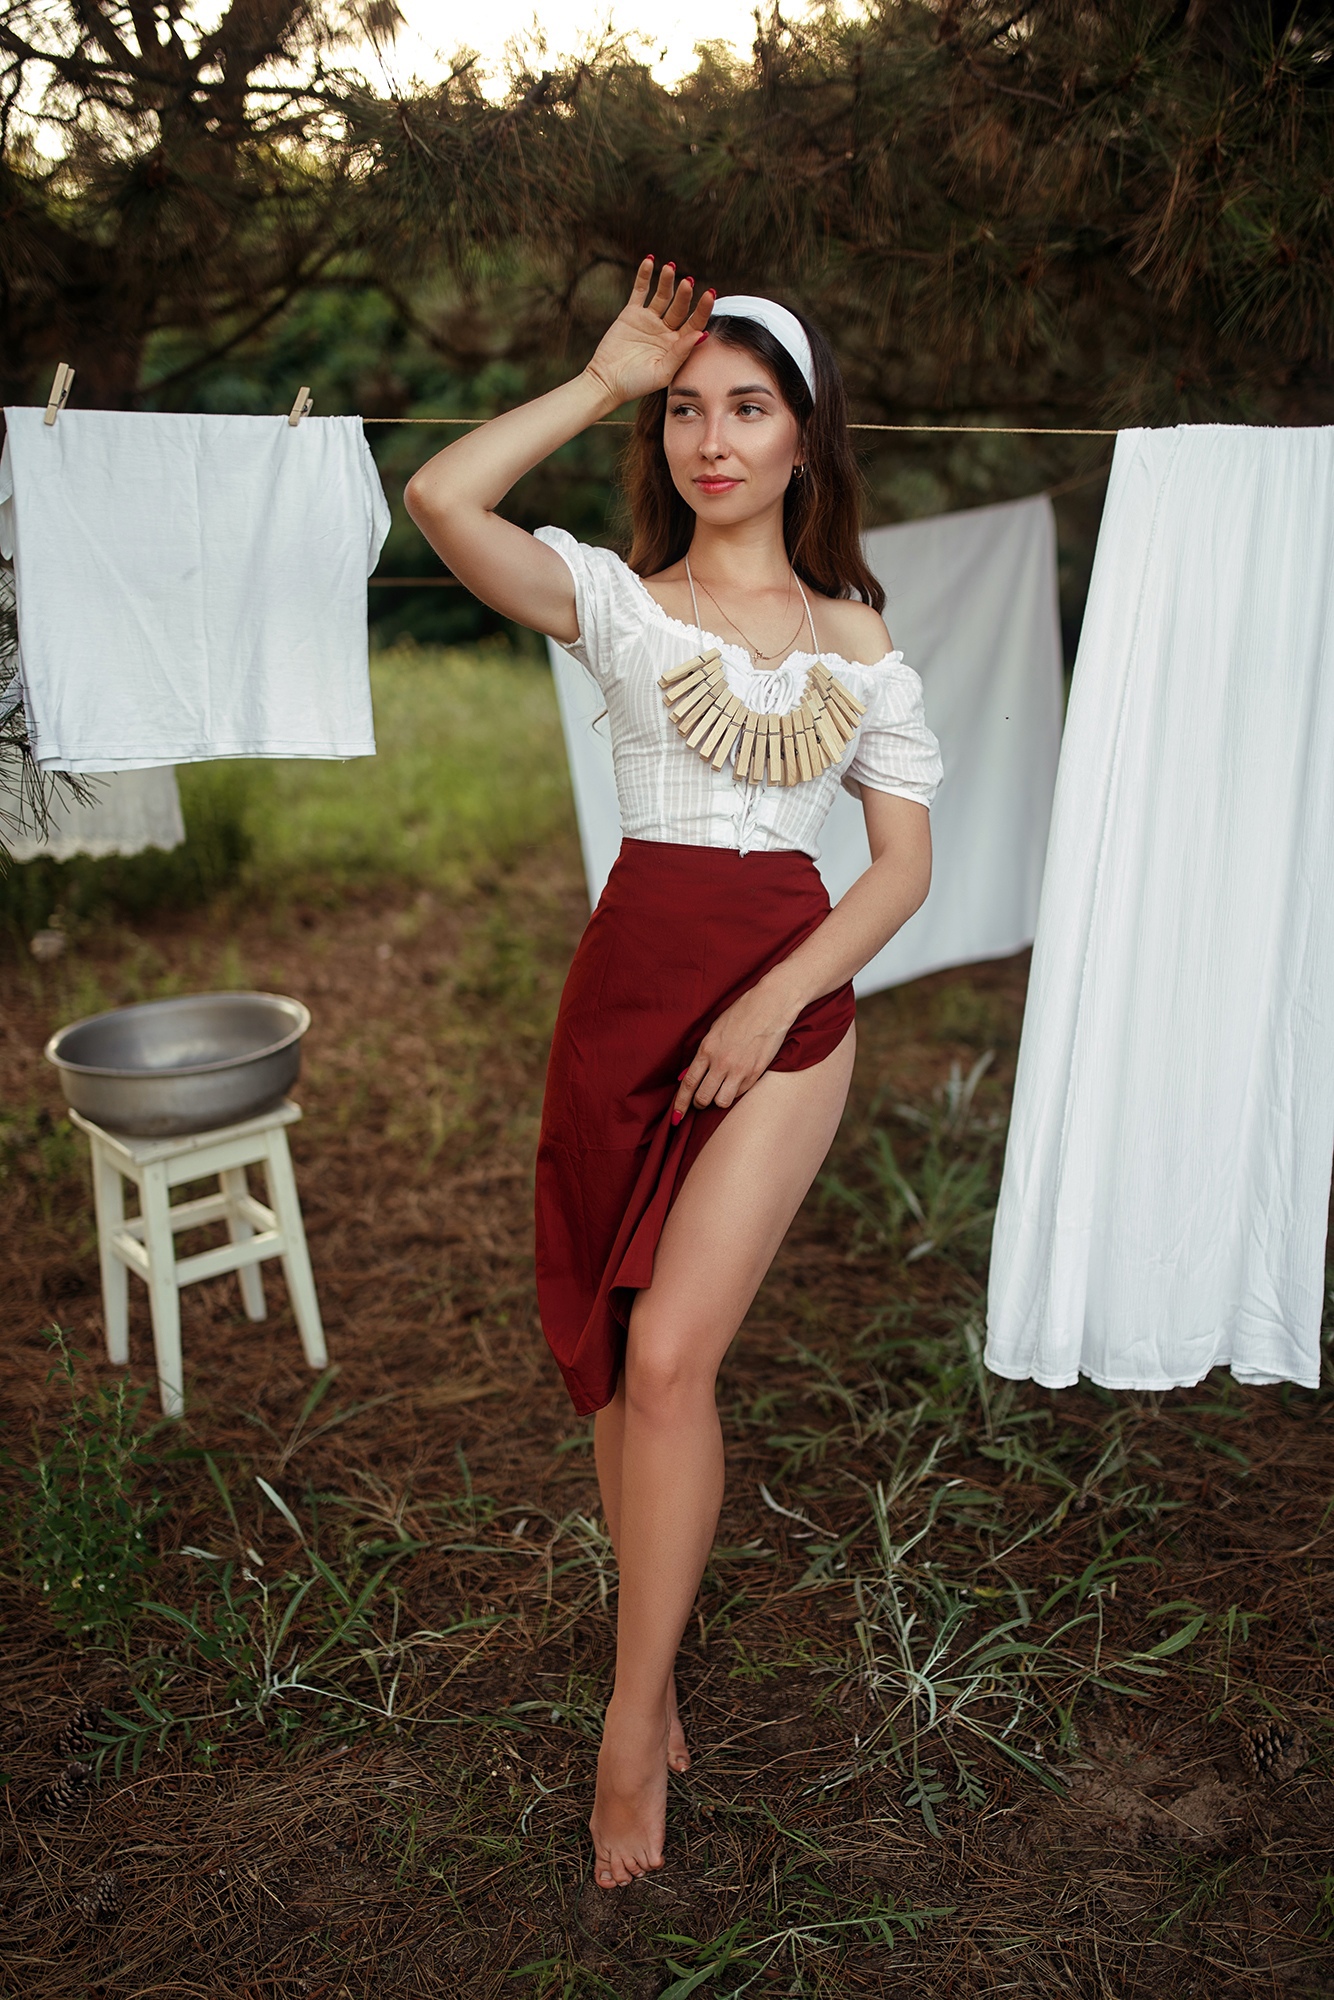 People 1334x2000 women hairband red skirt white clothing women outdoors trees looking away model brunette barefoot pointed toes laundry clothespins